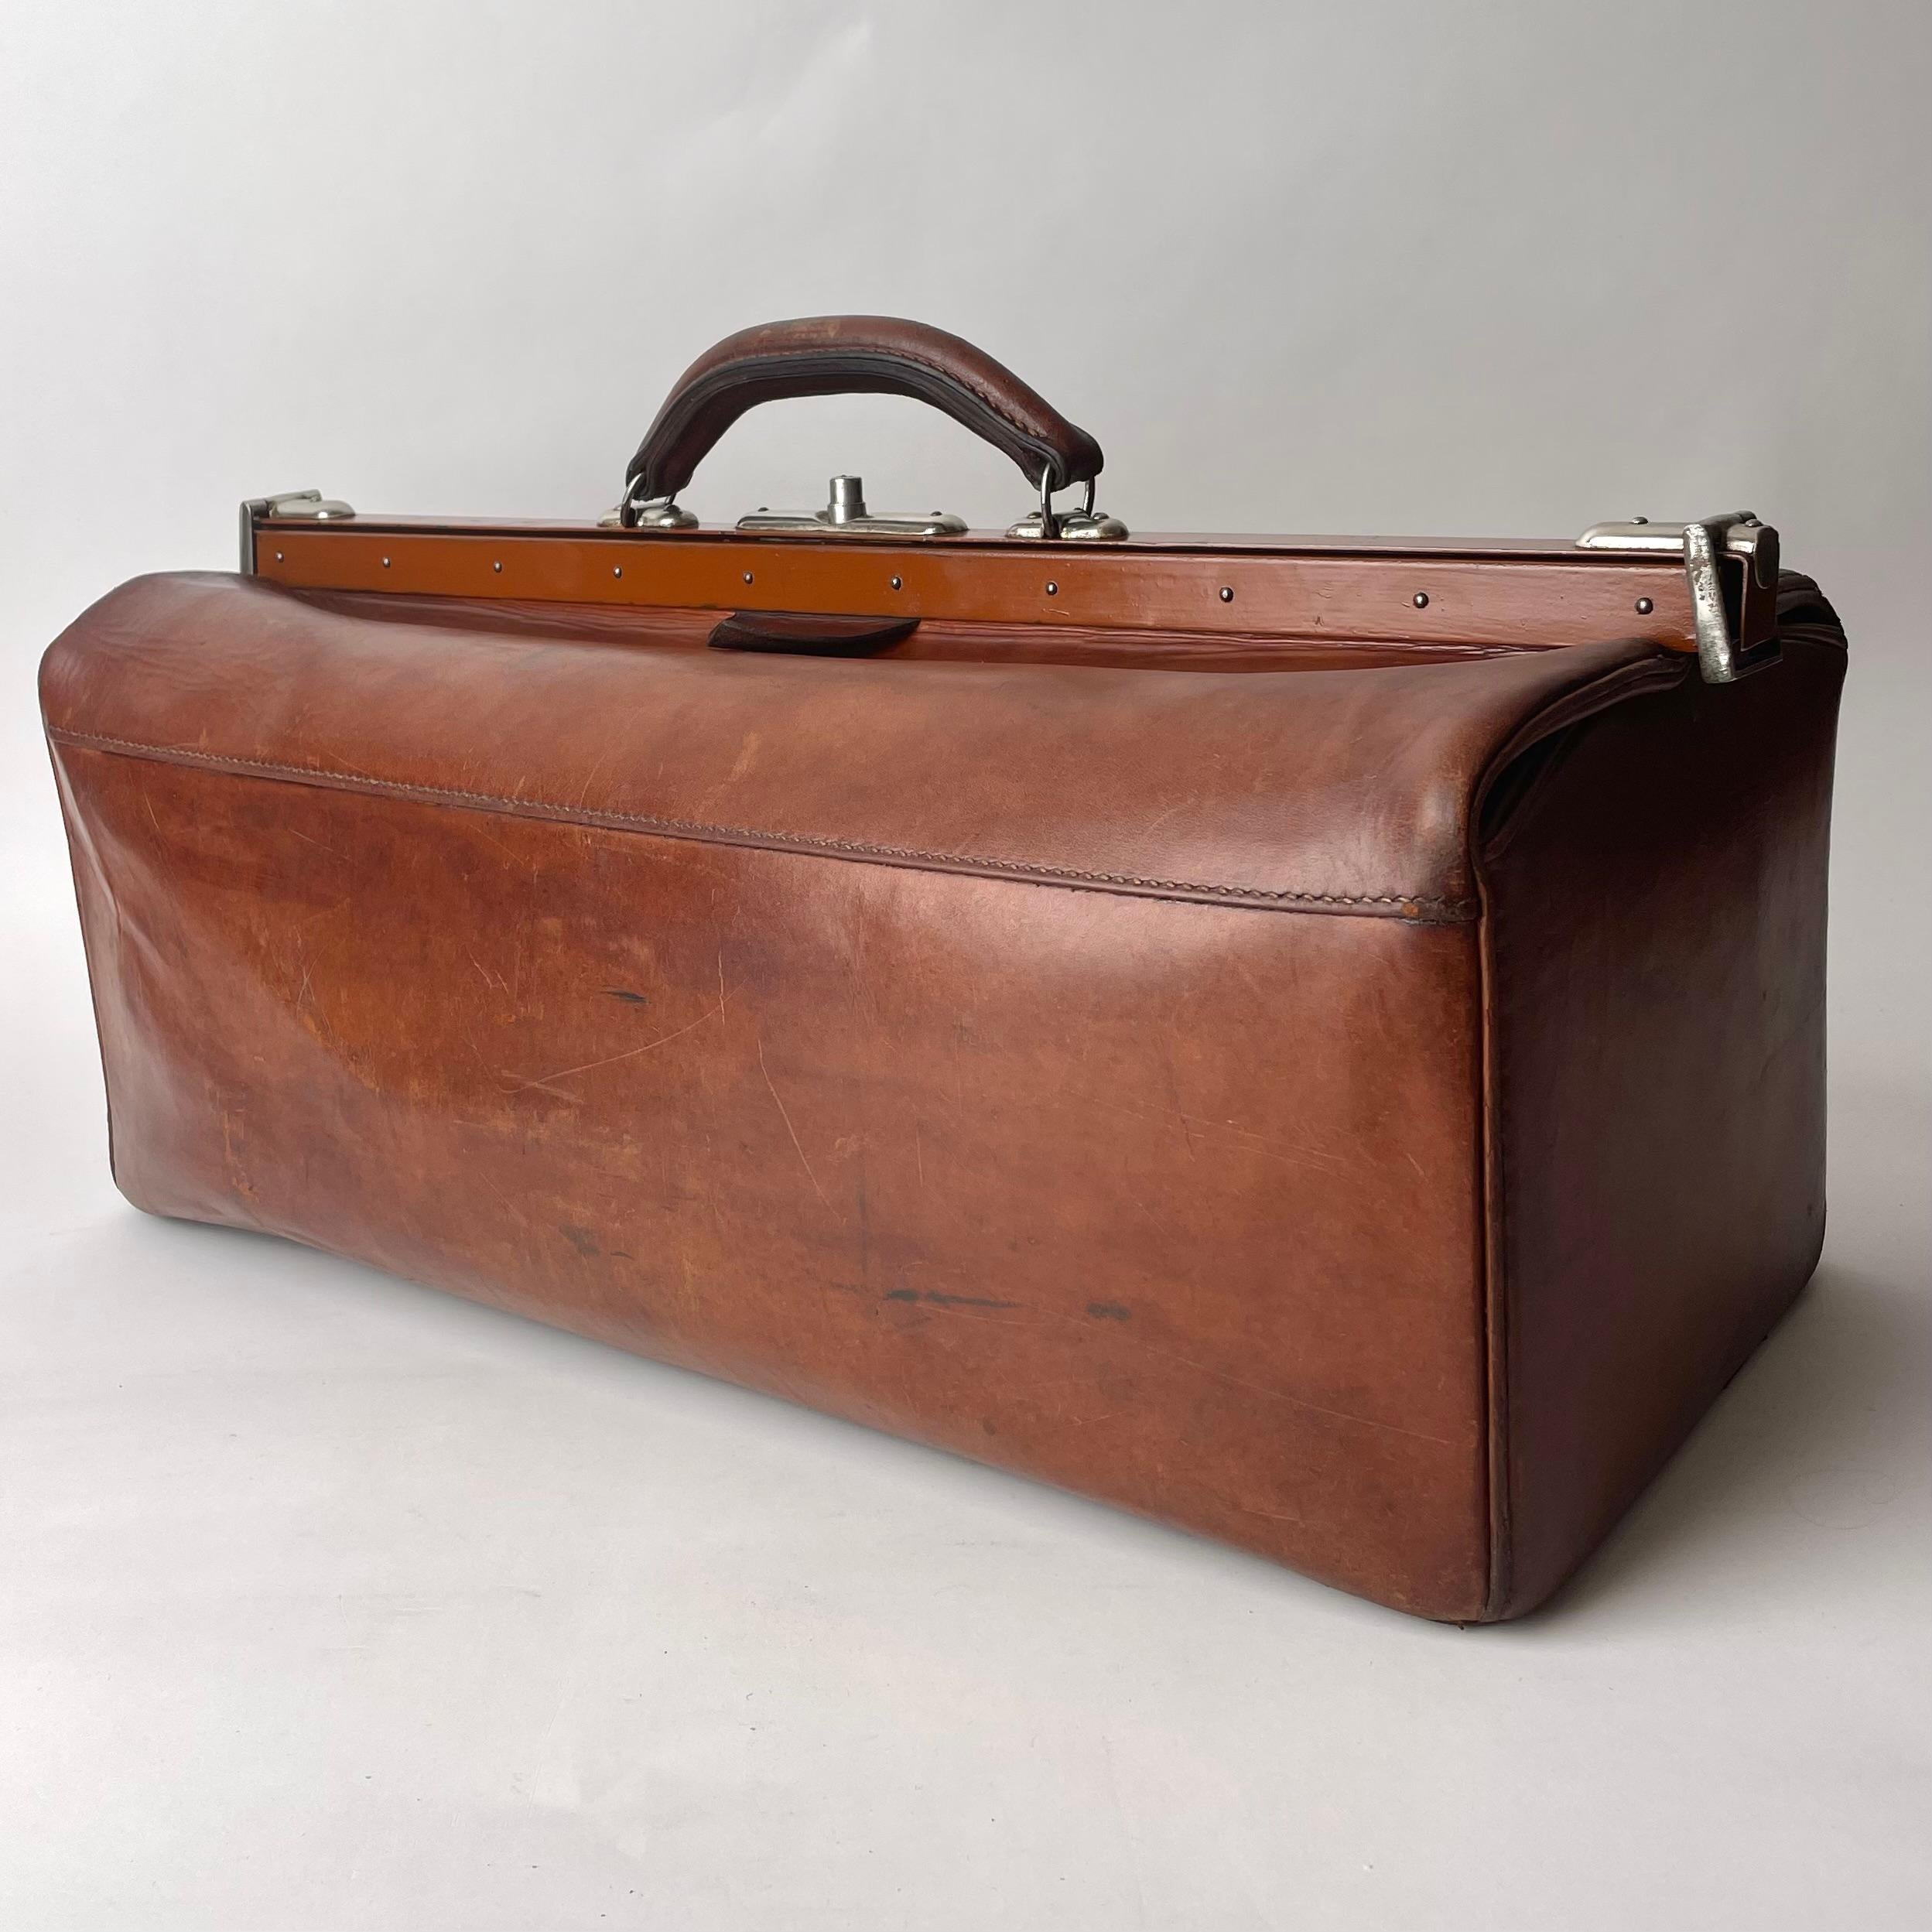 A Vintage Luggage Travel Bag in Brown Leather with Nickel Details. Early 19th Century Europe. 

A sleek and elegant vintage luggage bag in beautiful brown leather. Complete with nickel details and a functional lock mechanism. 

Wear consistent with